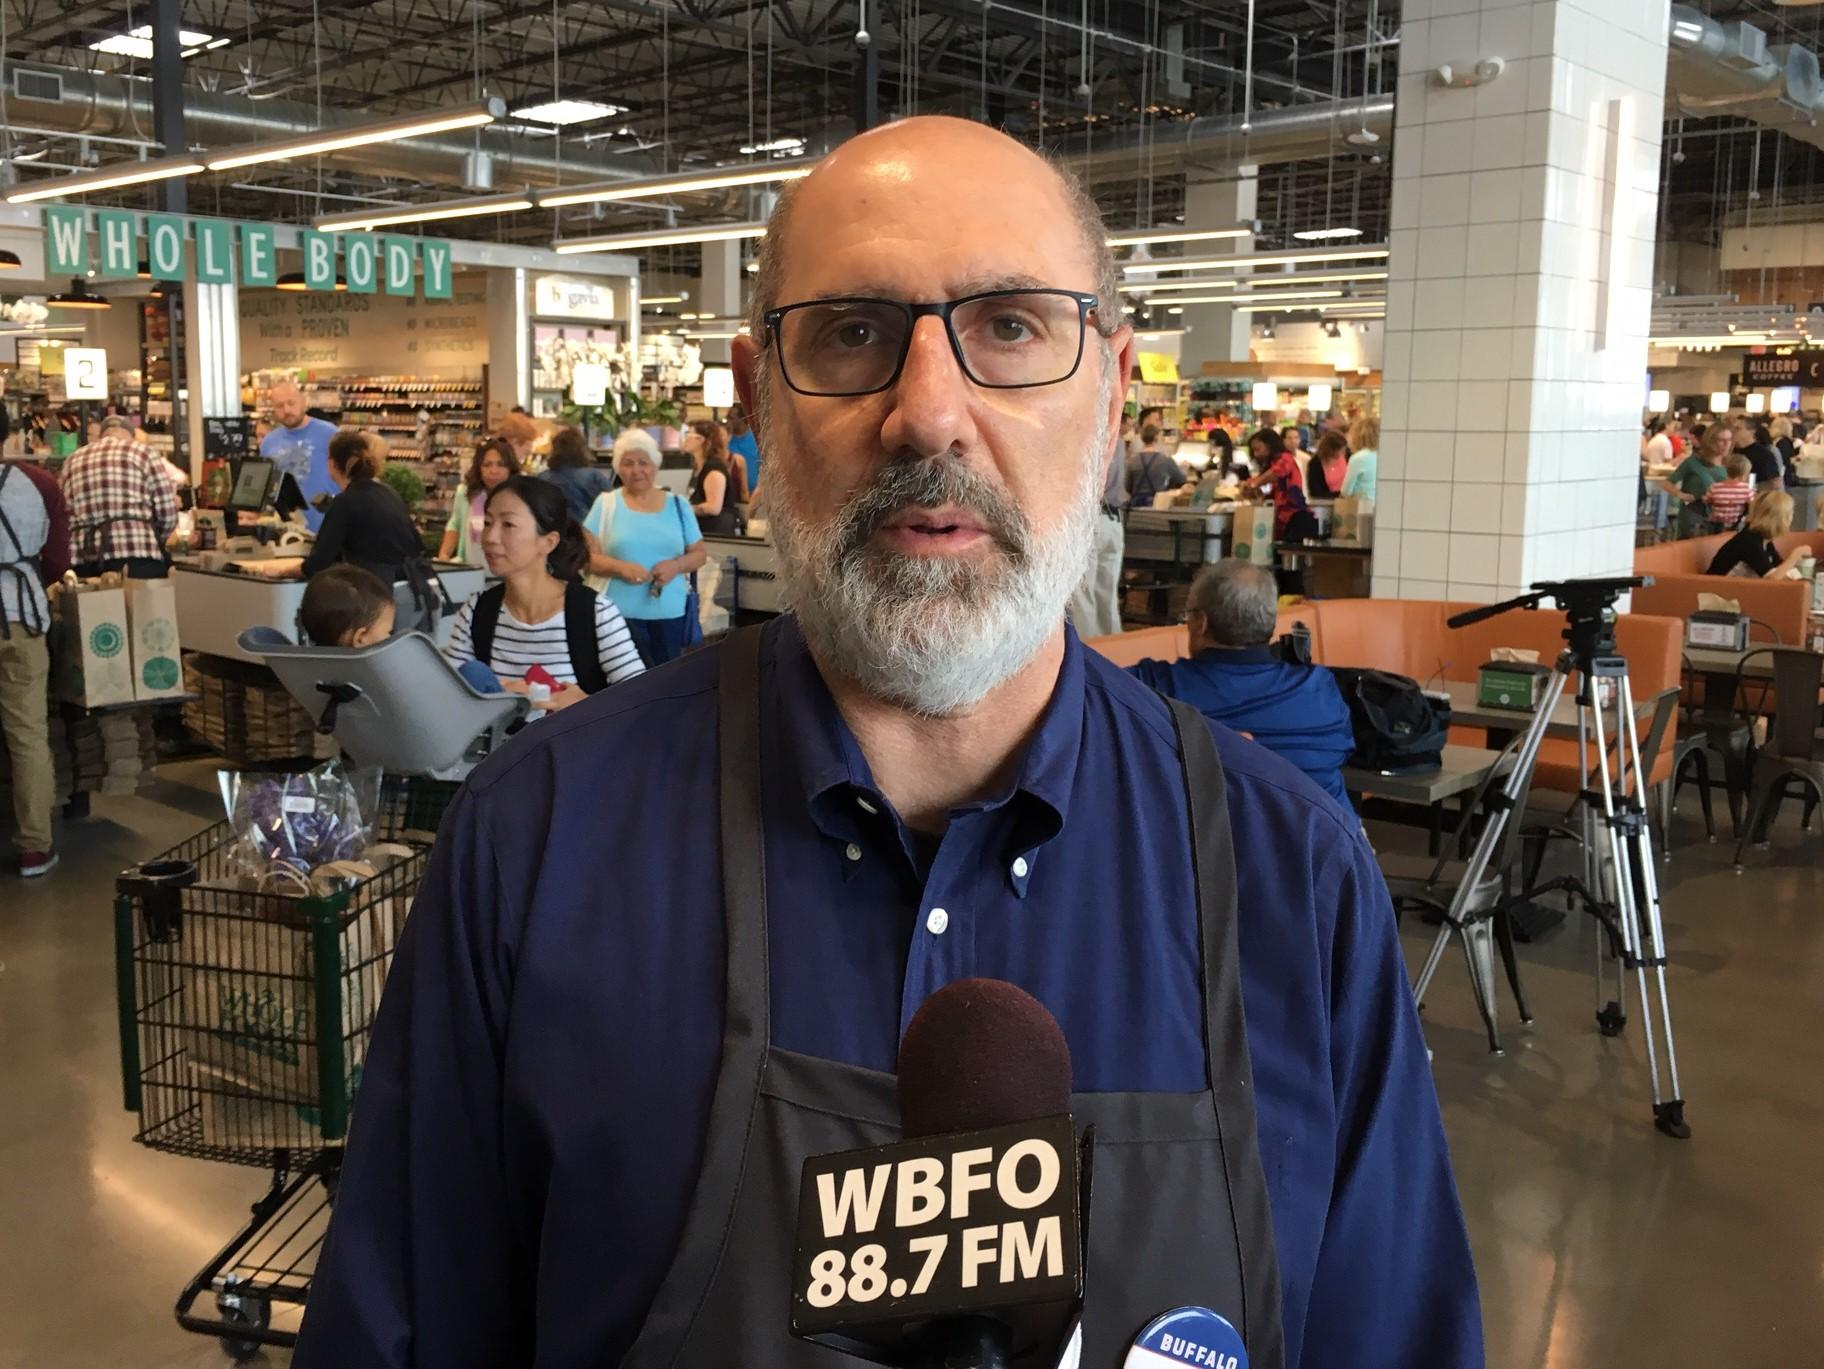 Whole Foods Market opens new store WBFO